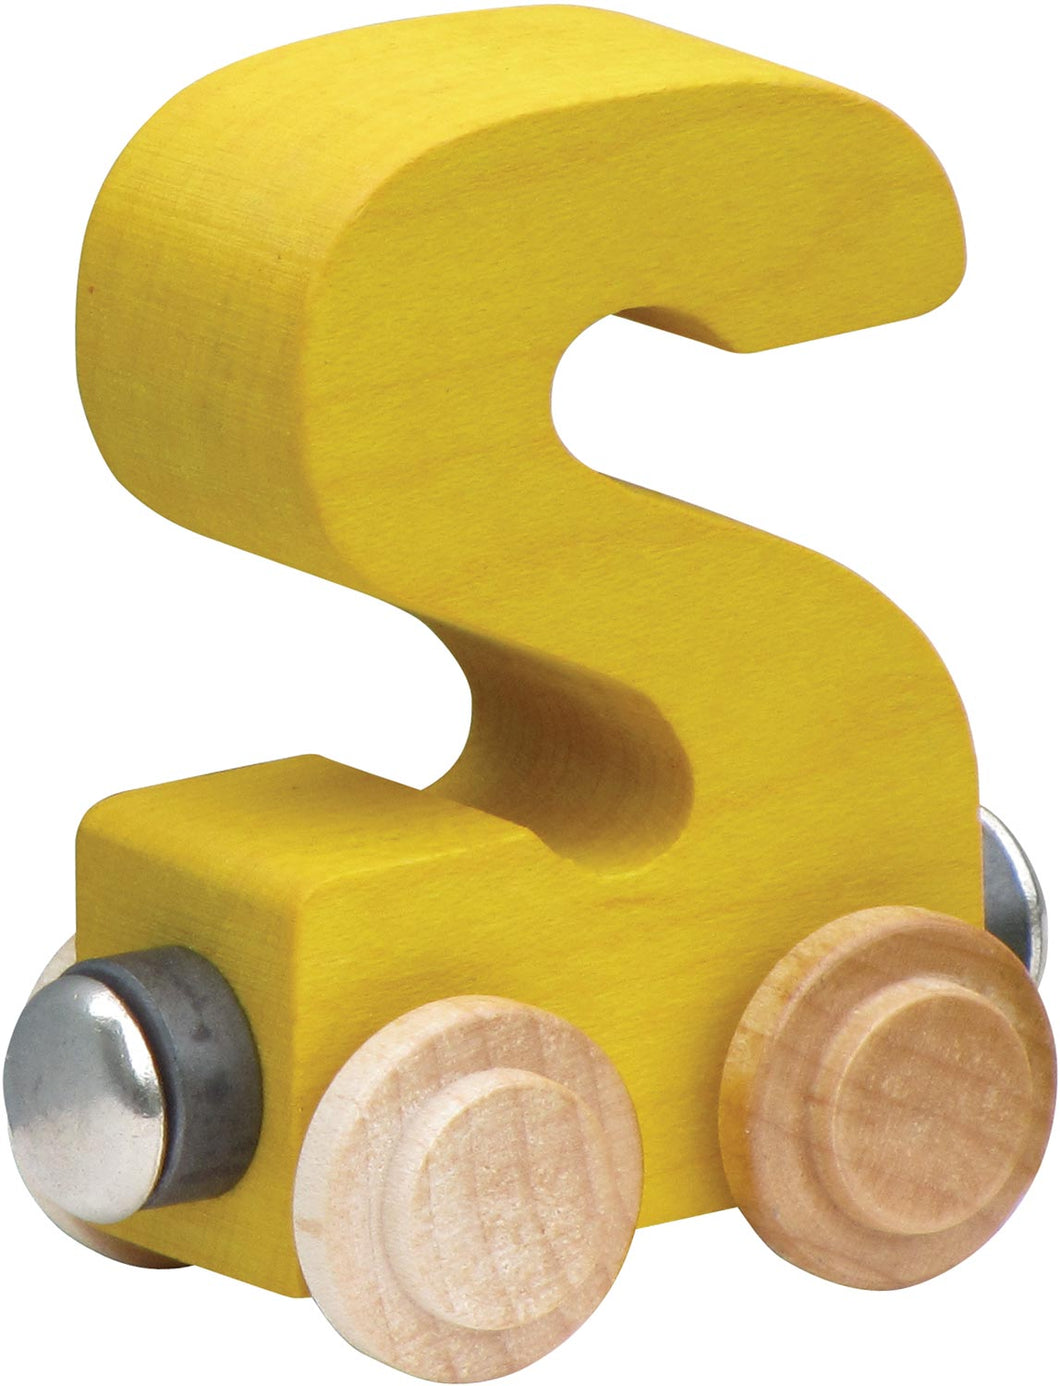 Letter S- Bright Colored Wooden Name Train